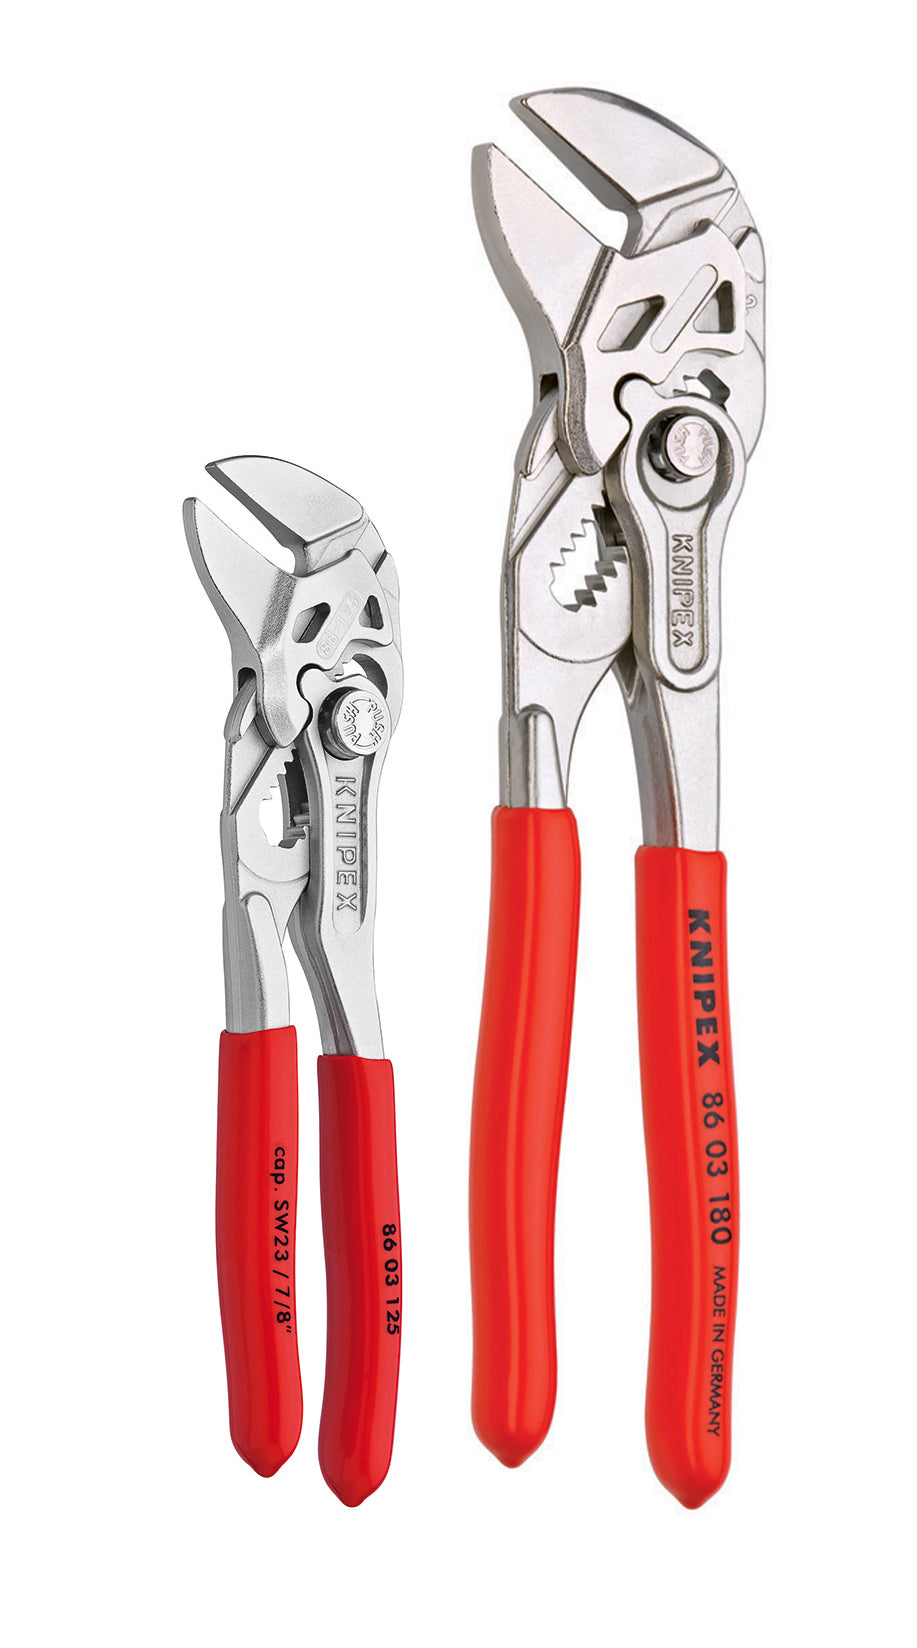 KNIPEX Tools - 2 Piece Compact Pliers Wrench Set - Mini Grip, Hold & B